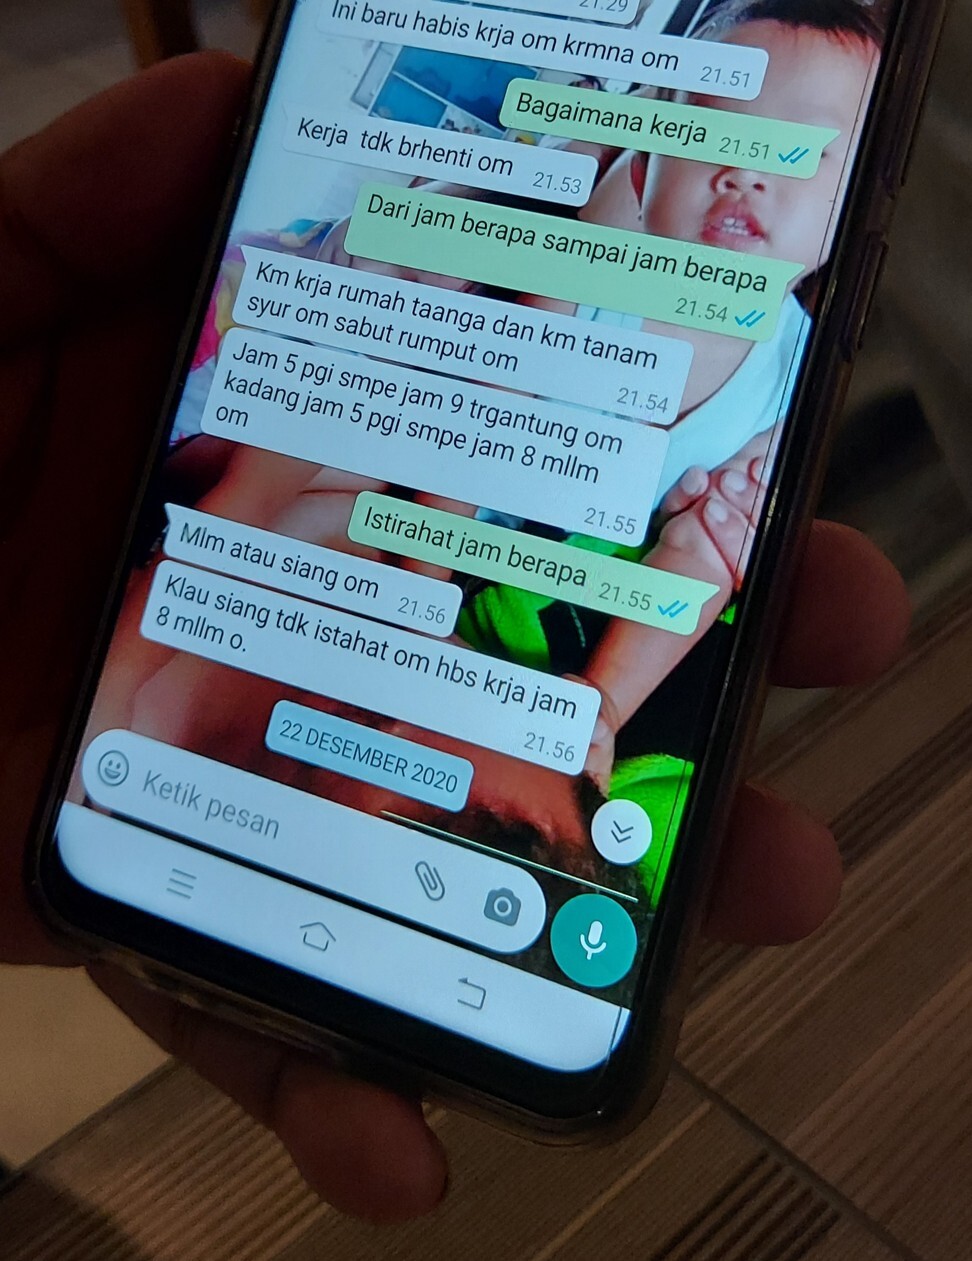 WhatsApp messages between Agnes and Abi about her working conditions. Photo: Aisyah Llewellyn